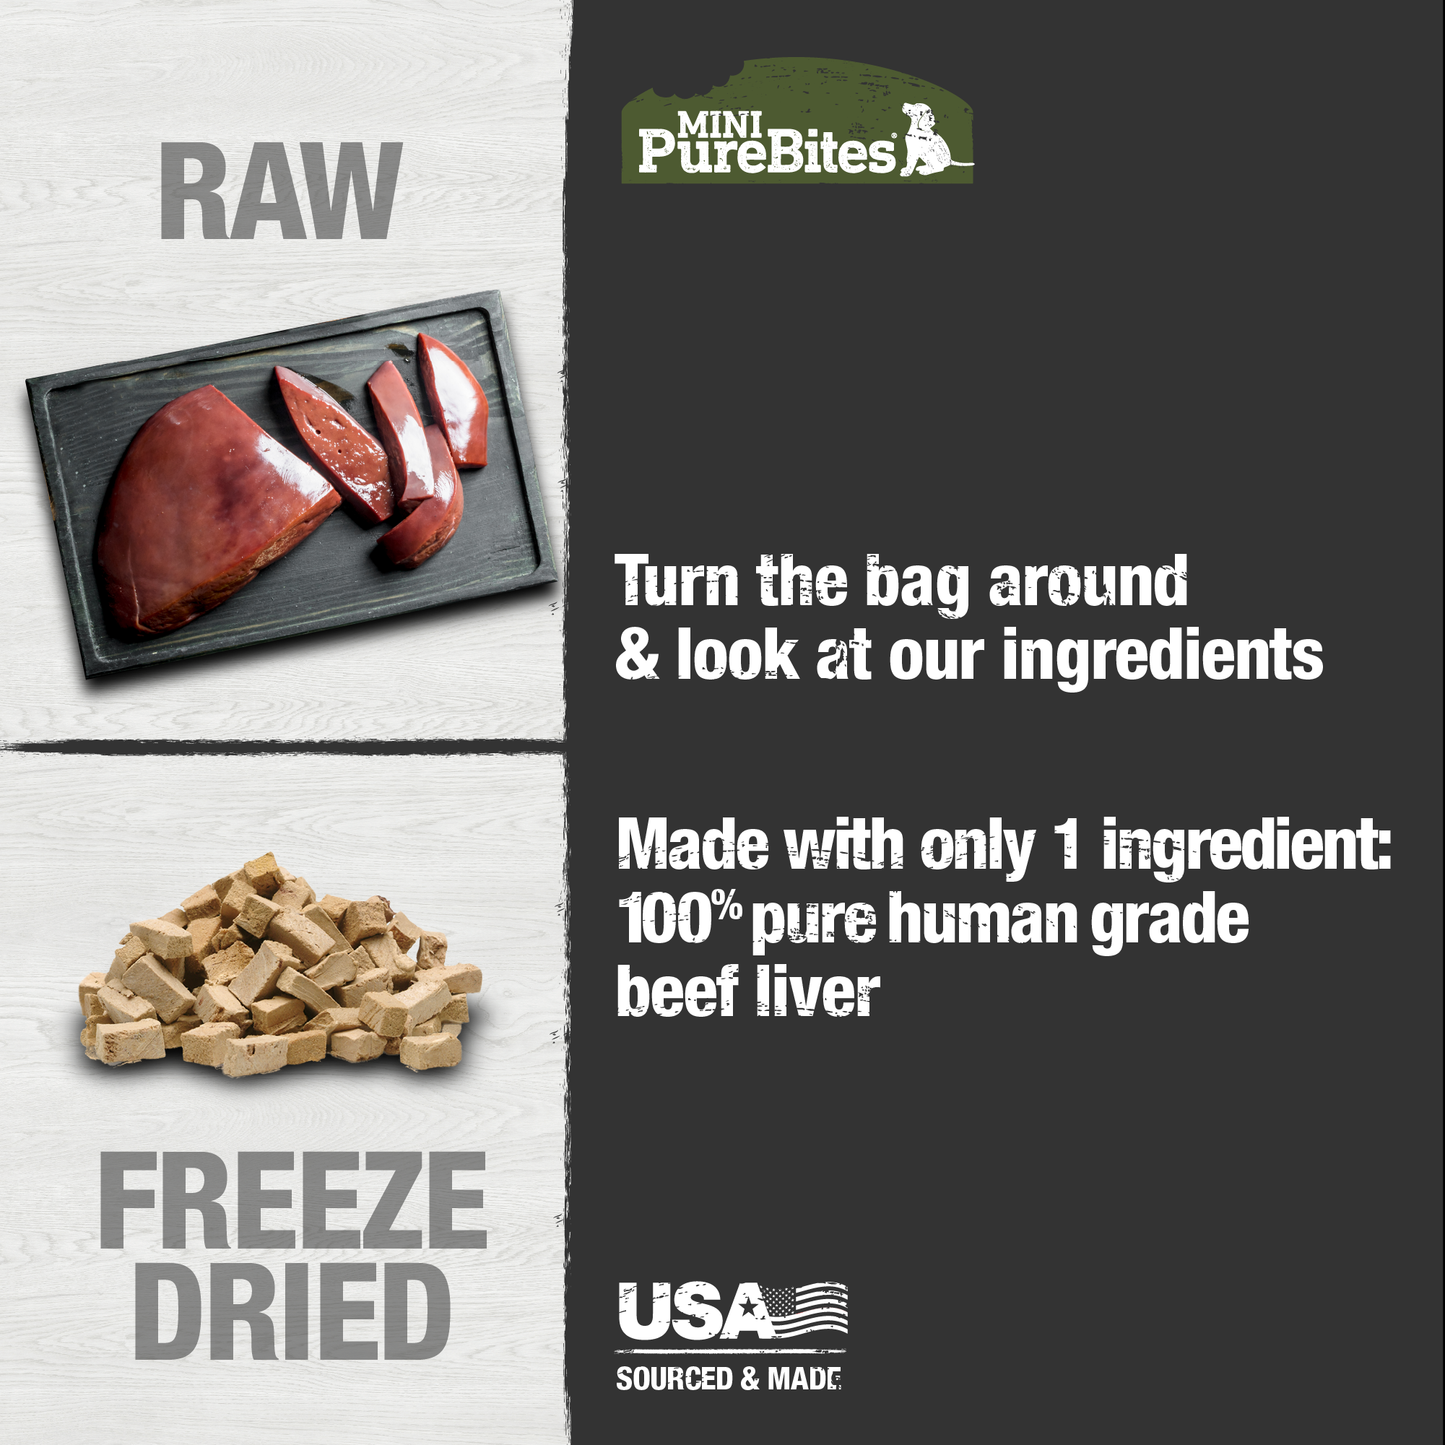 Made with only 1 Ingredient you can read, pronounce, and trust: USA sourced human grade beef liver.